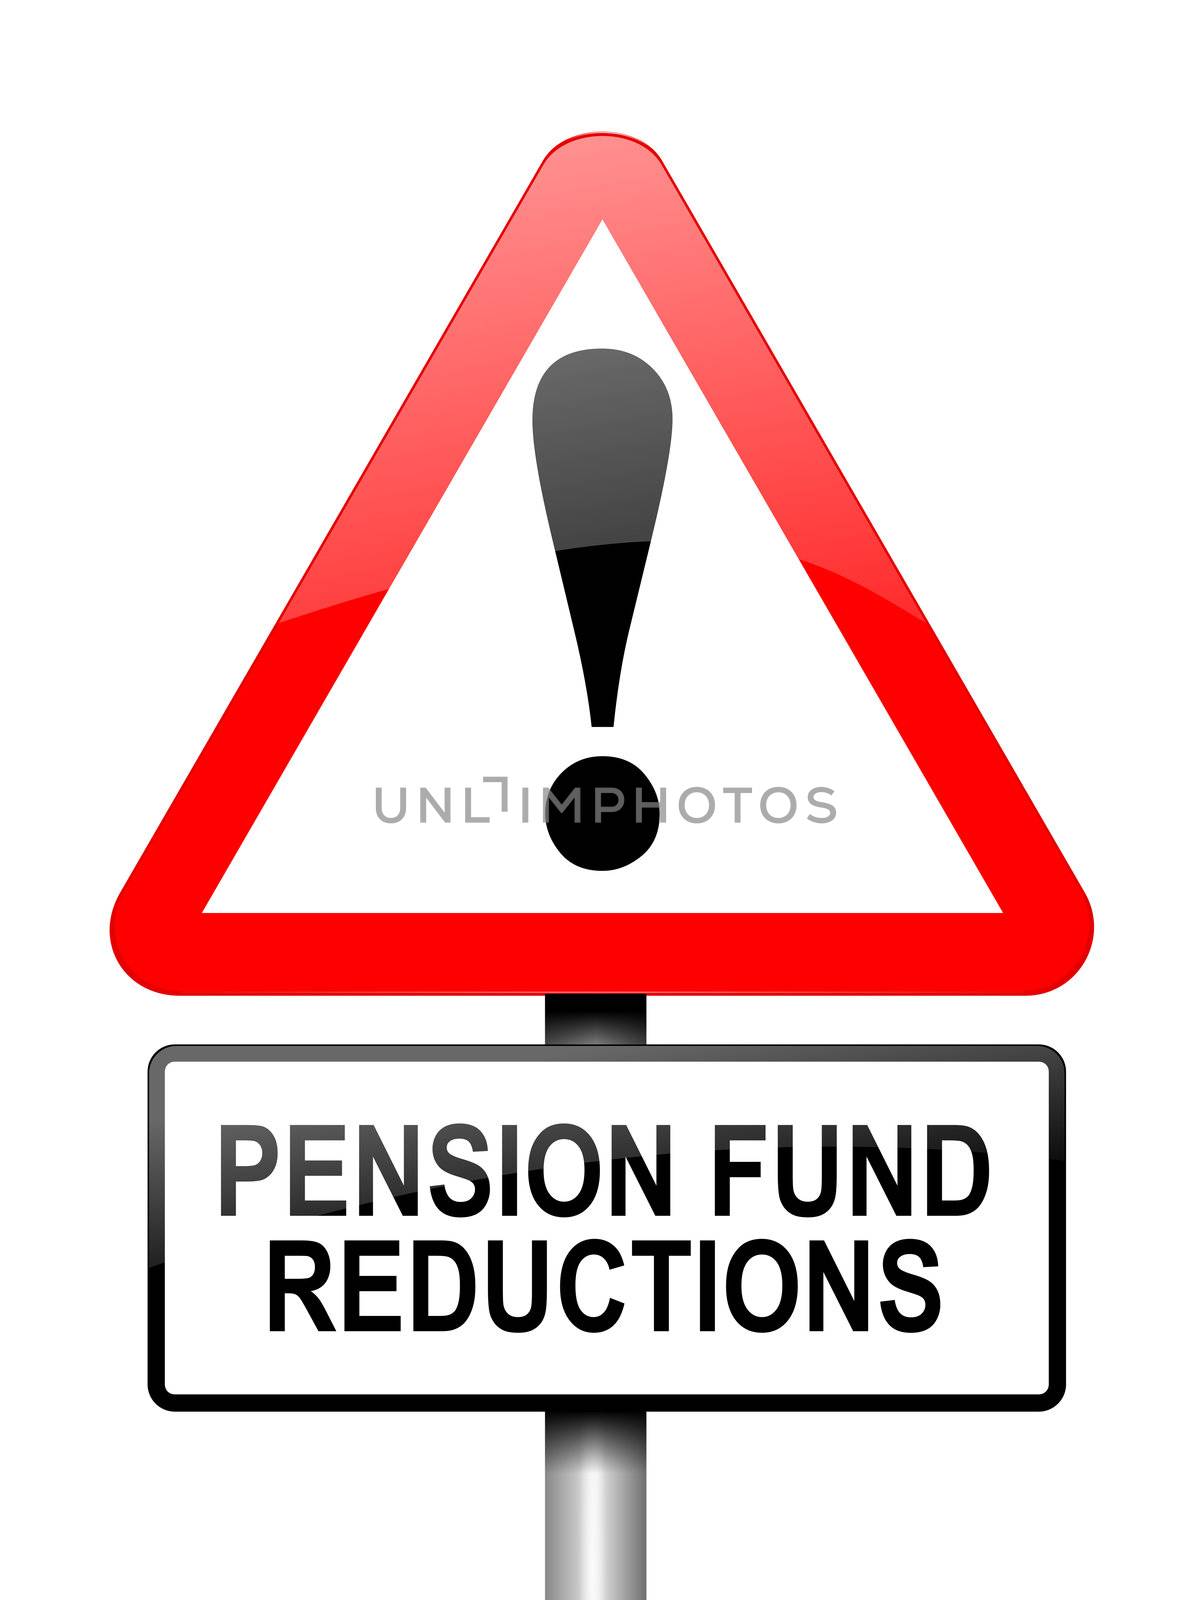 Pension fund disappointment. by 72soul